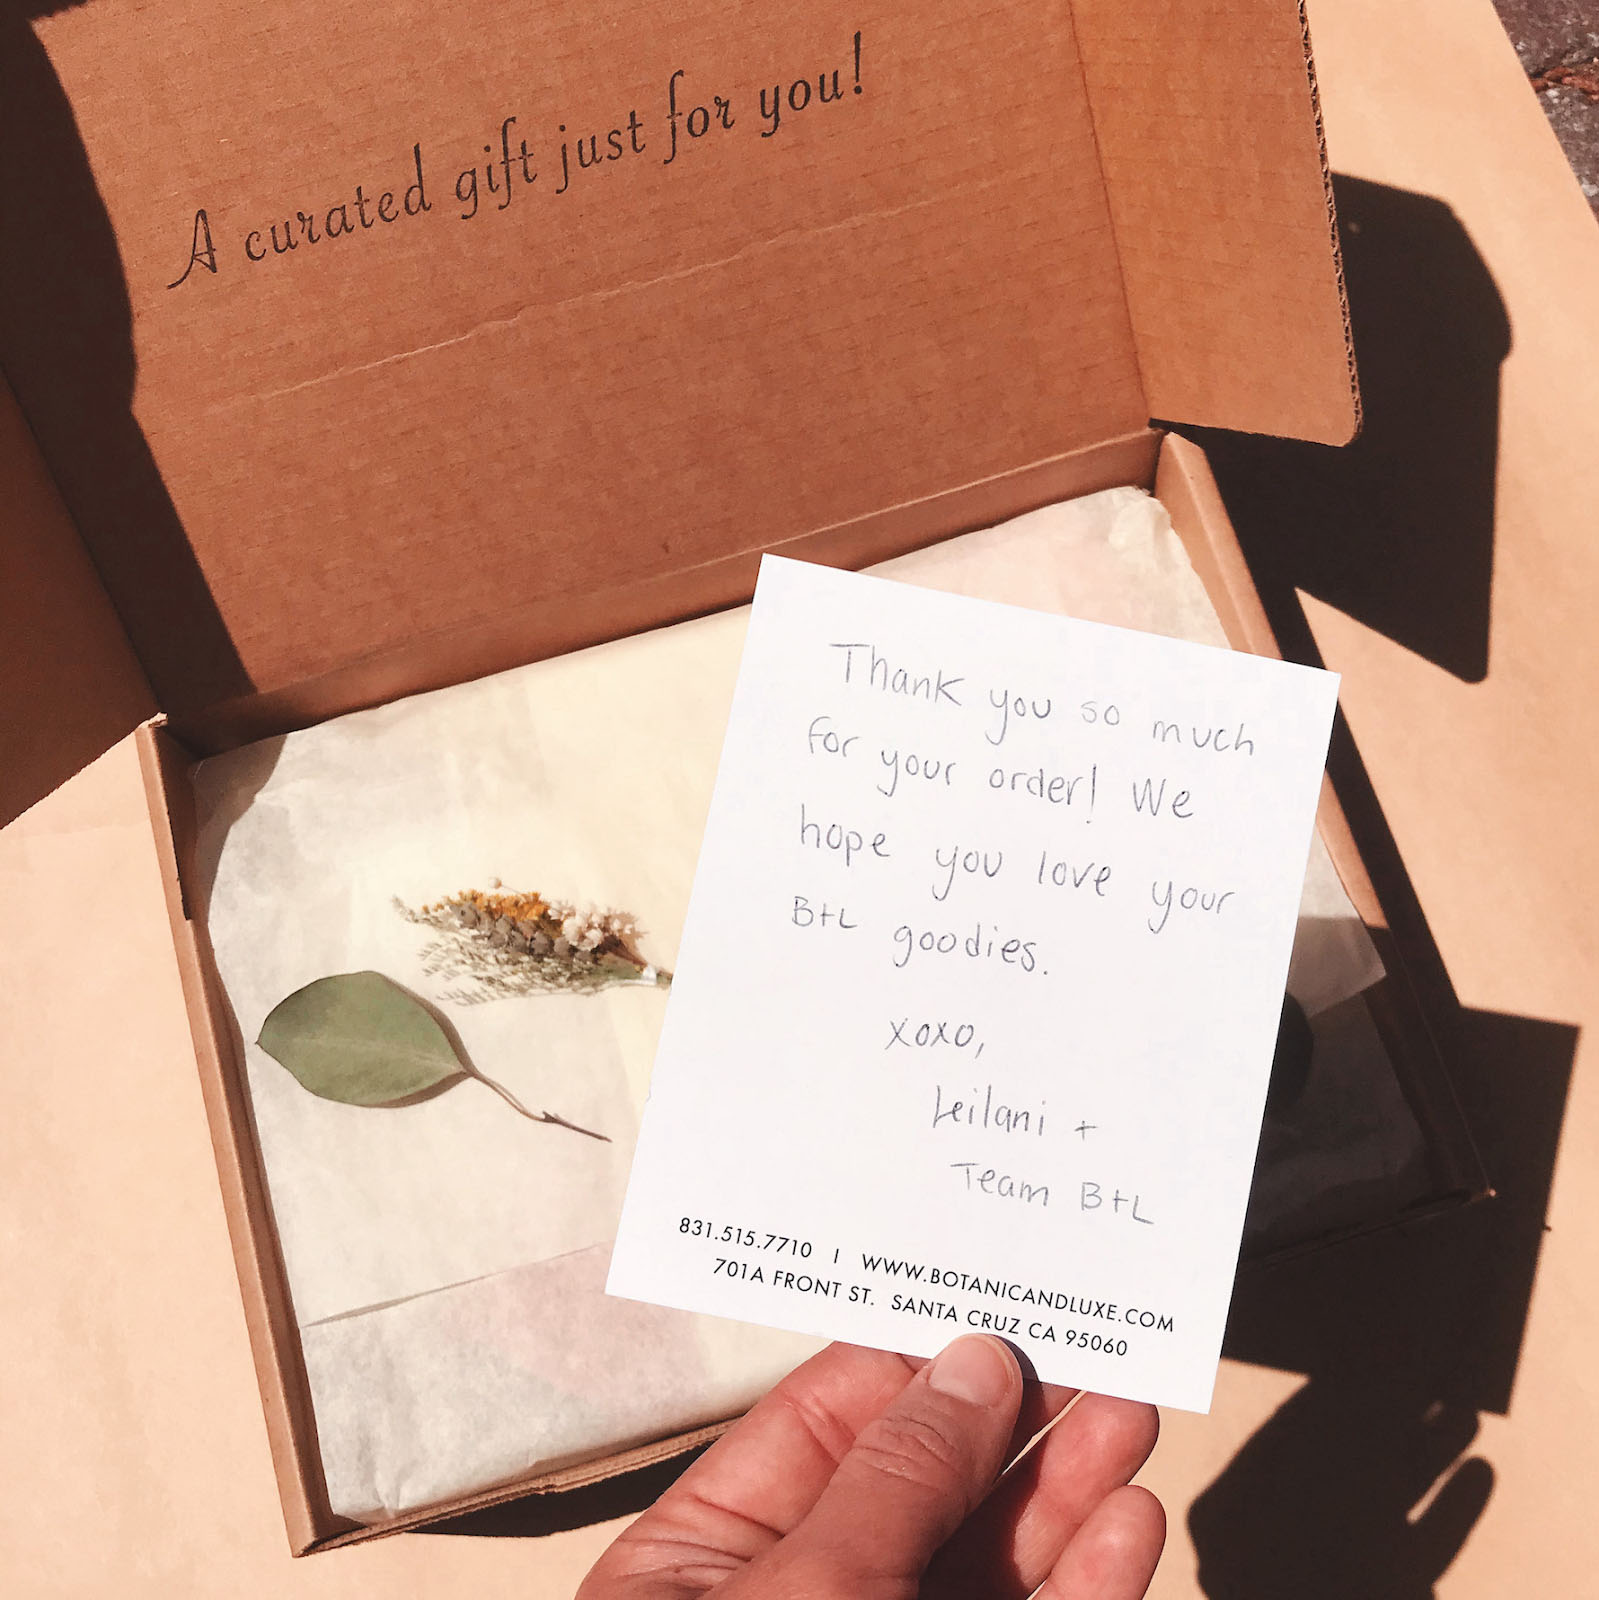 Botanic and Luxe unboxing experience handwritten thank you note.